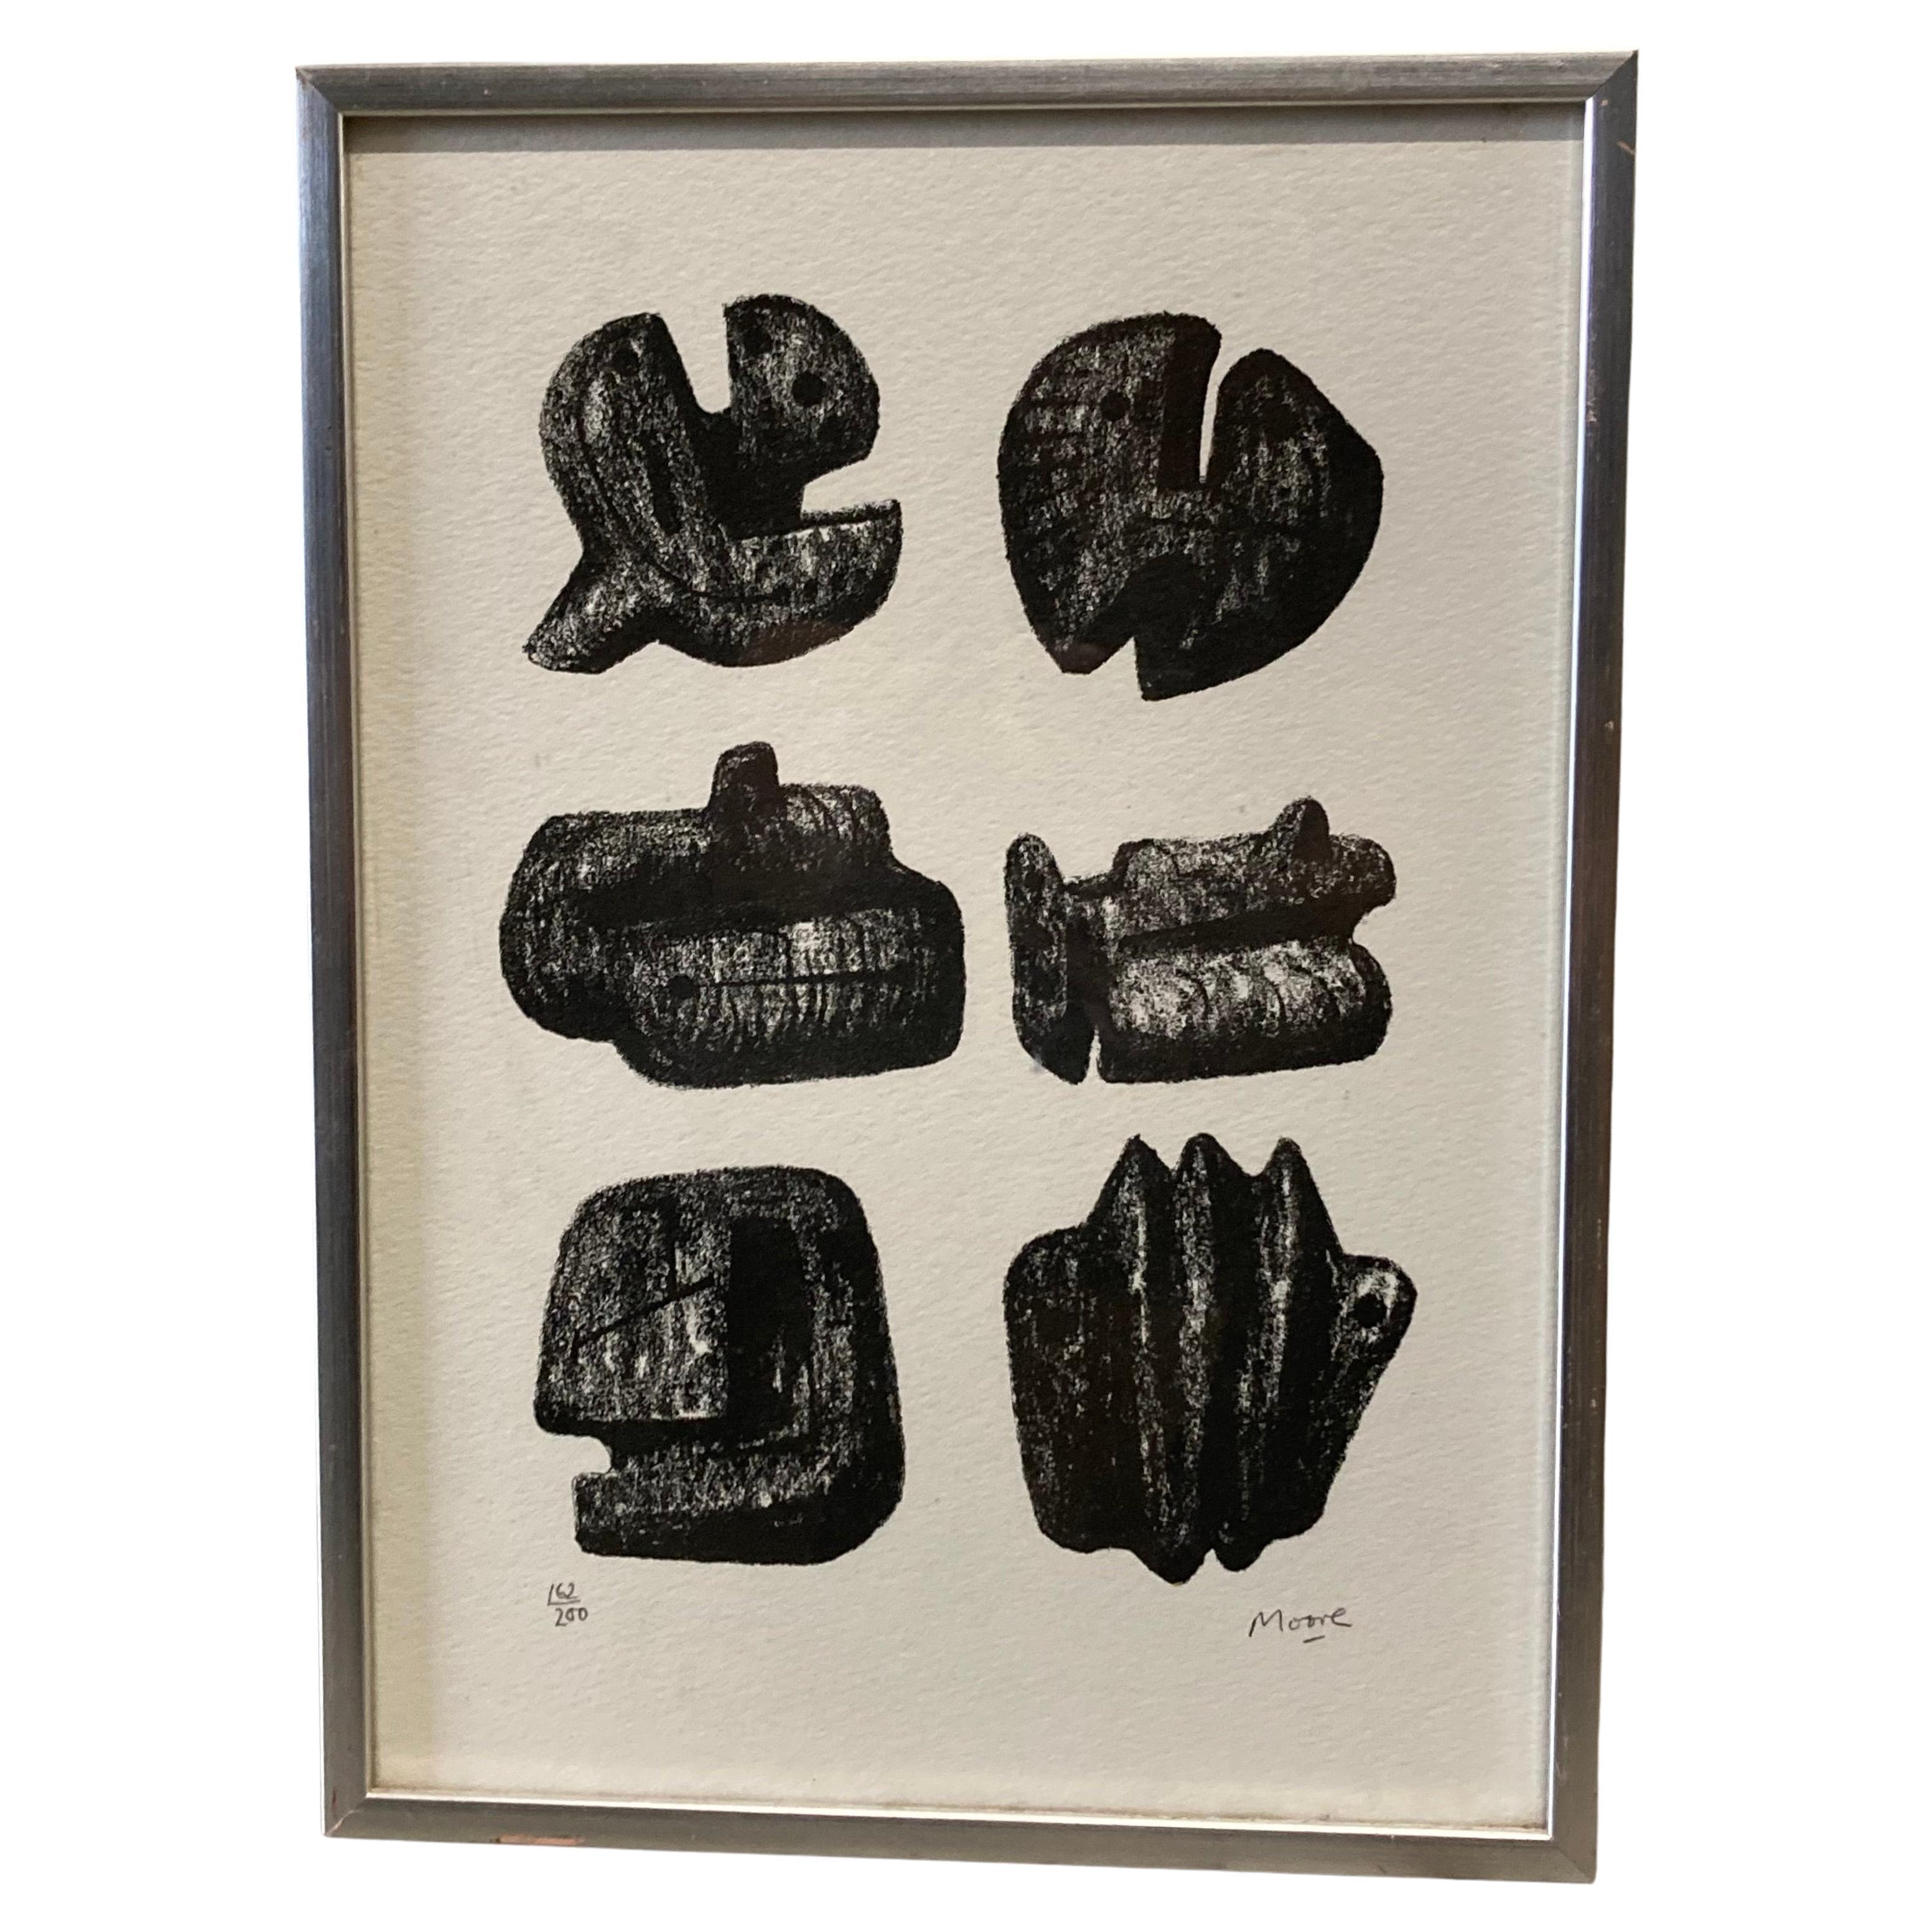 Henry Moore '1898 1986', Six Stones, Lithograph, 1973, Signed and Numbered